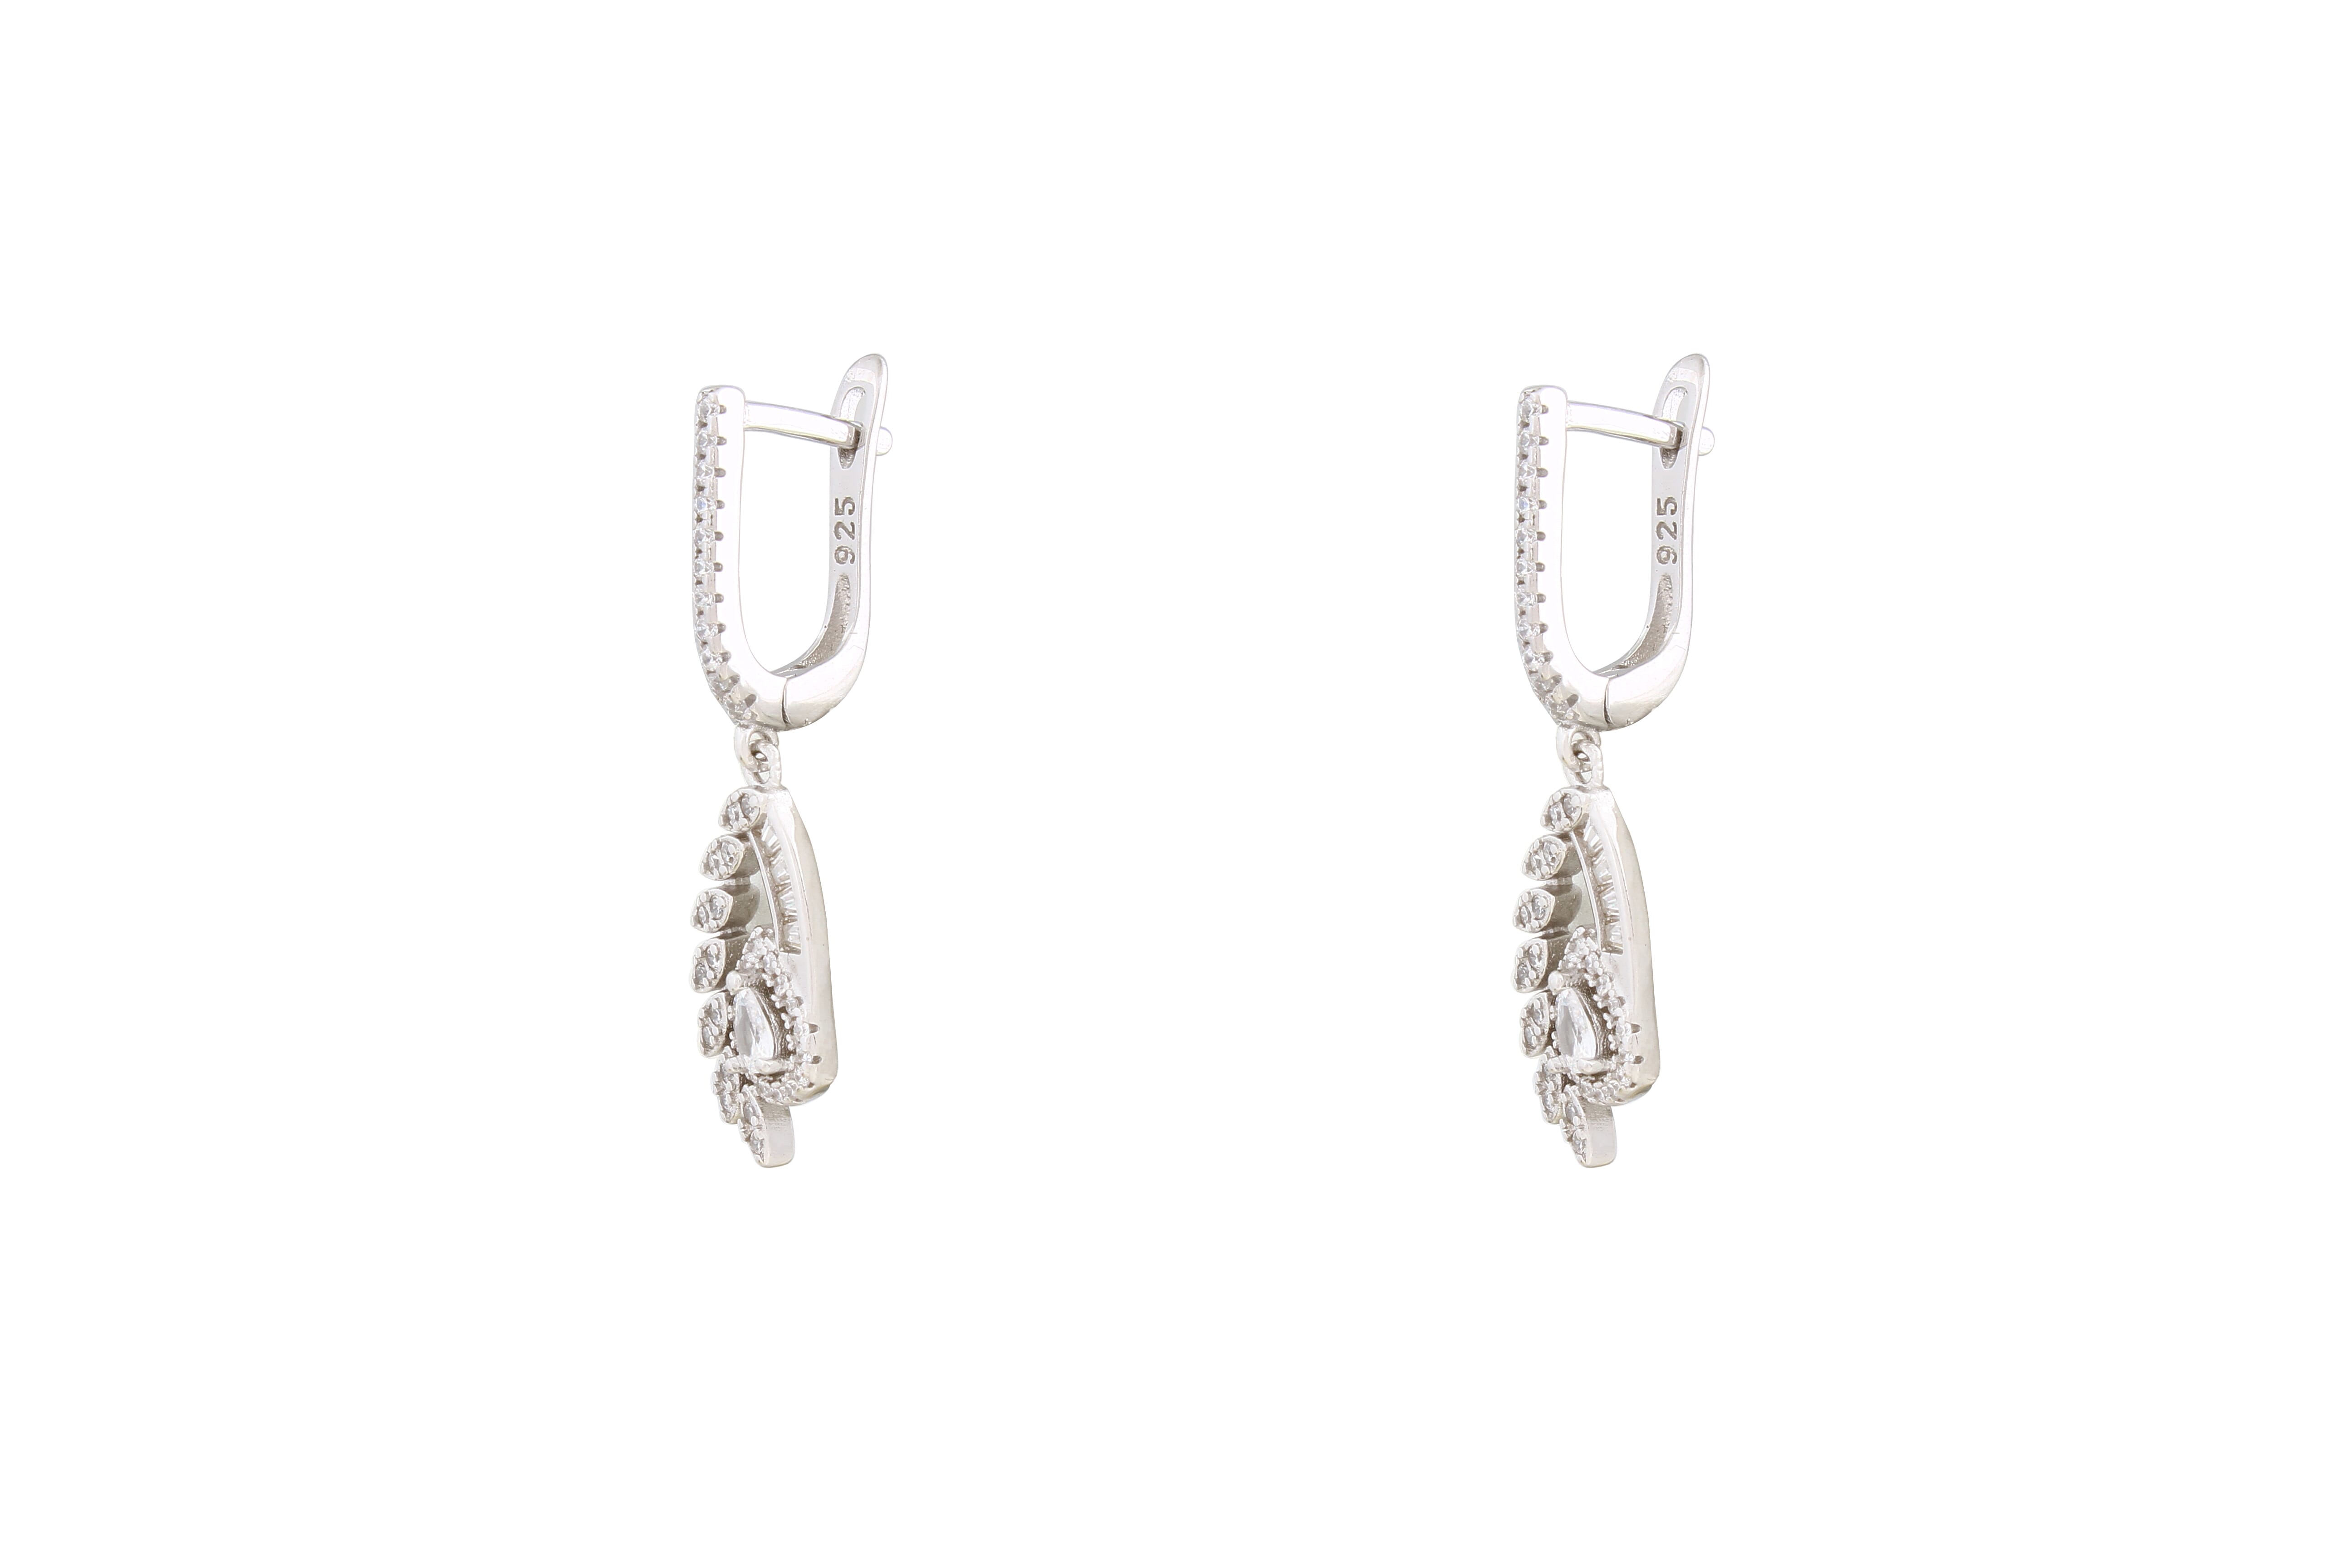 Asfour Crystal Drop Earrings With Decorative Design In 925 Sterling Silver ER0462